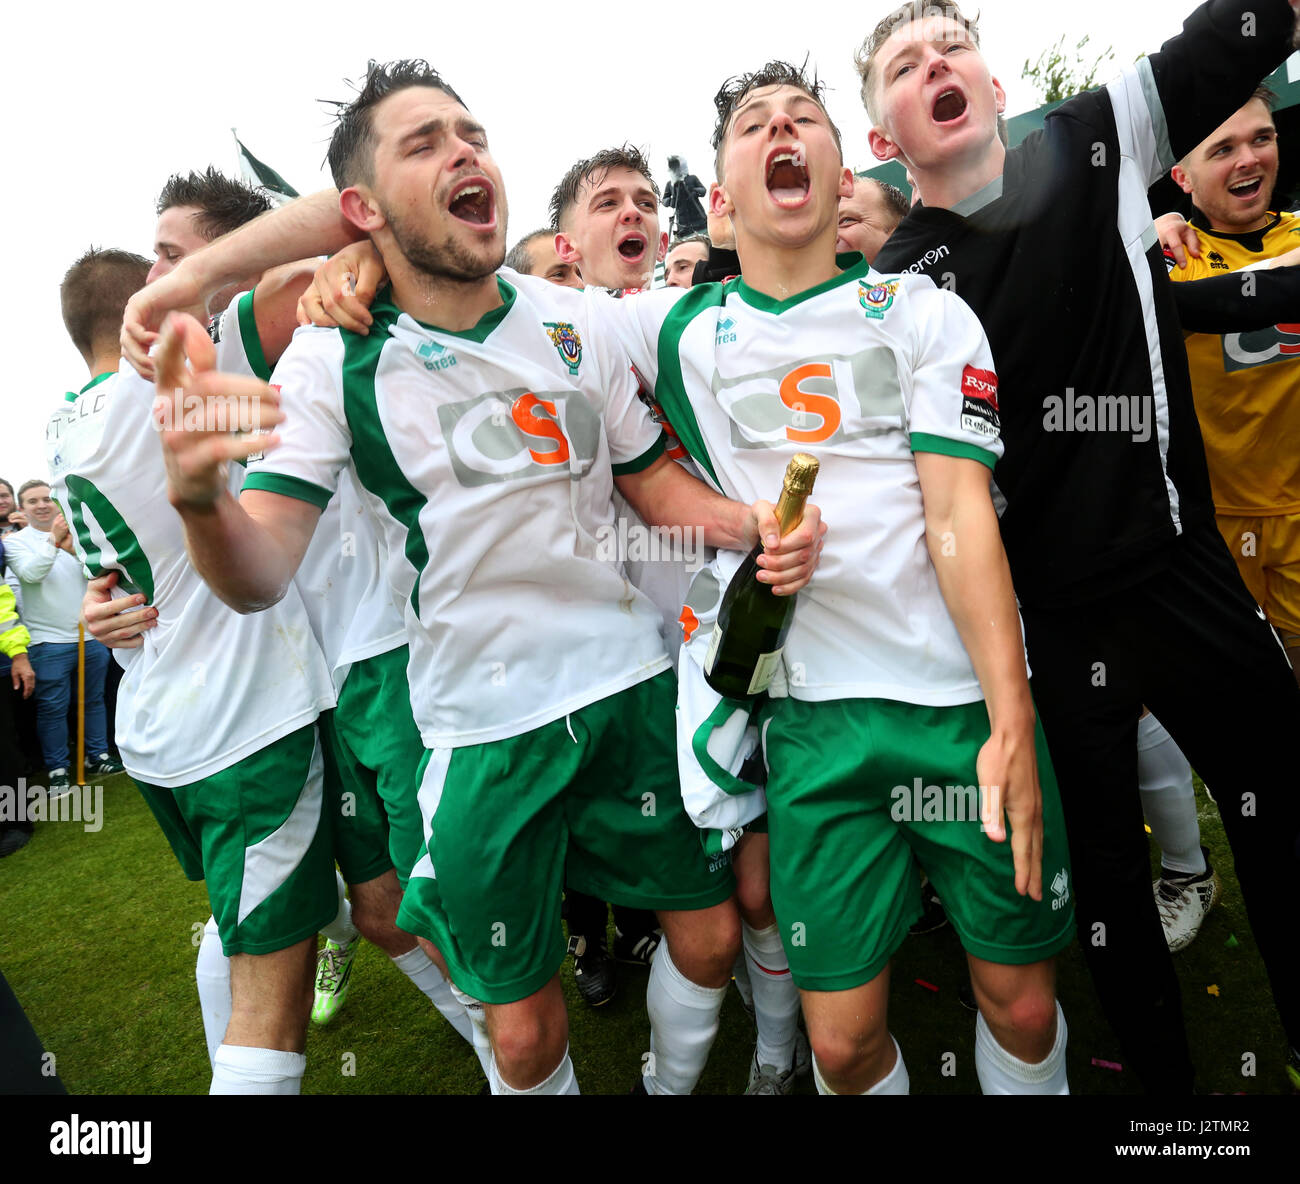 Bognor Regis, UK. 01st May, 2017. Bognor Regis, UK. Bognor Regis Football Club pictured celebrating beating Dulwich Hamlet to win the Ryman Football League Season 2016- 2107 Premier Division Play-off Final to be promoted to the National League South. Credit: Sam Stephenson/Alamy Live News Stock Photo